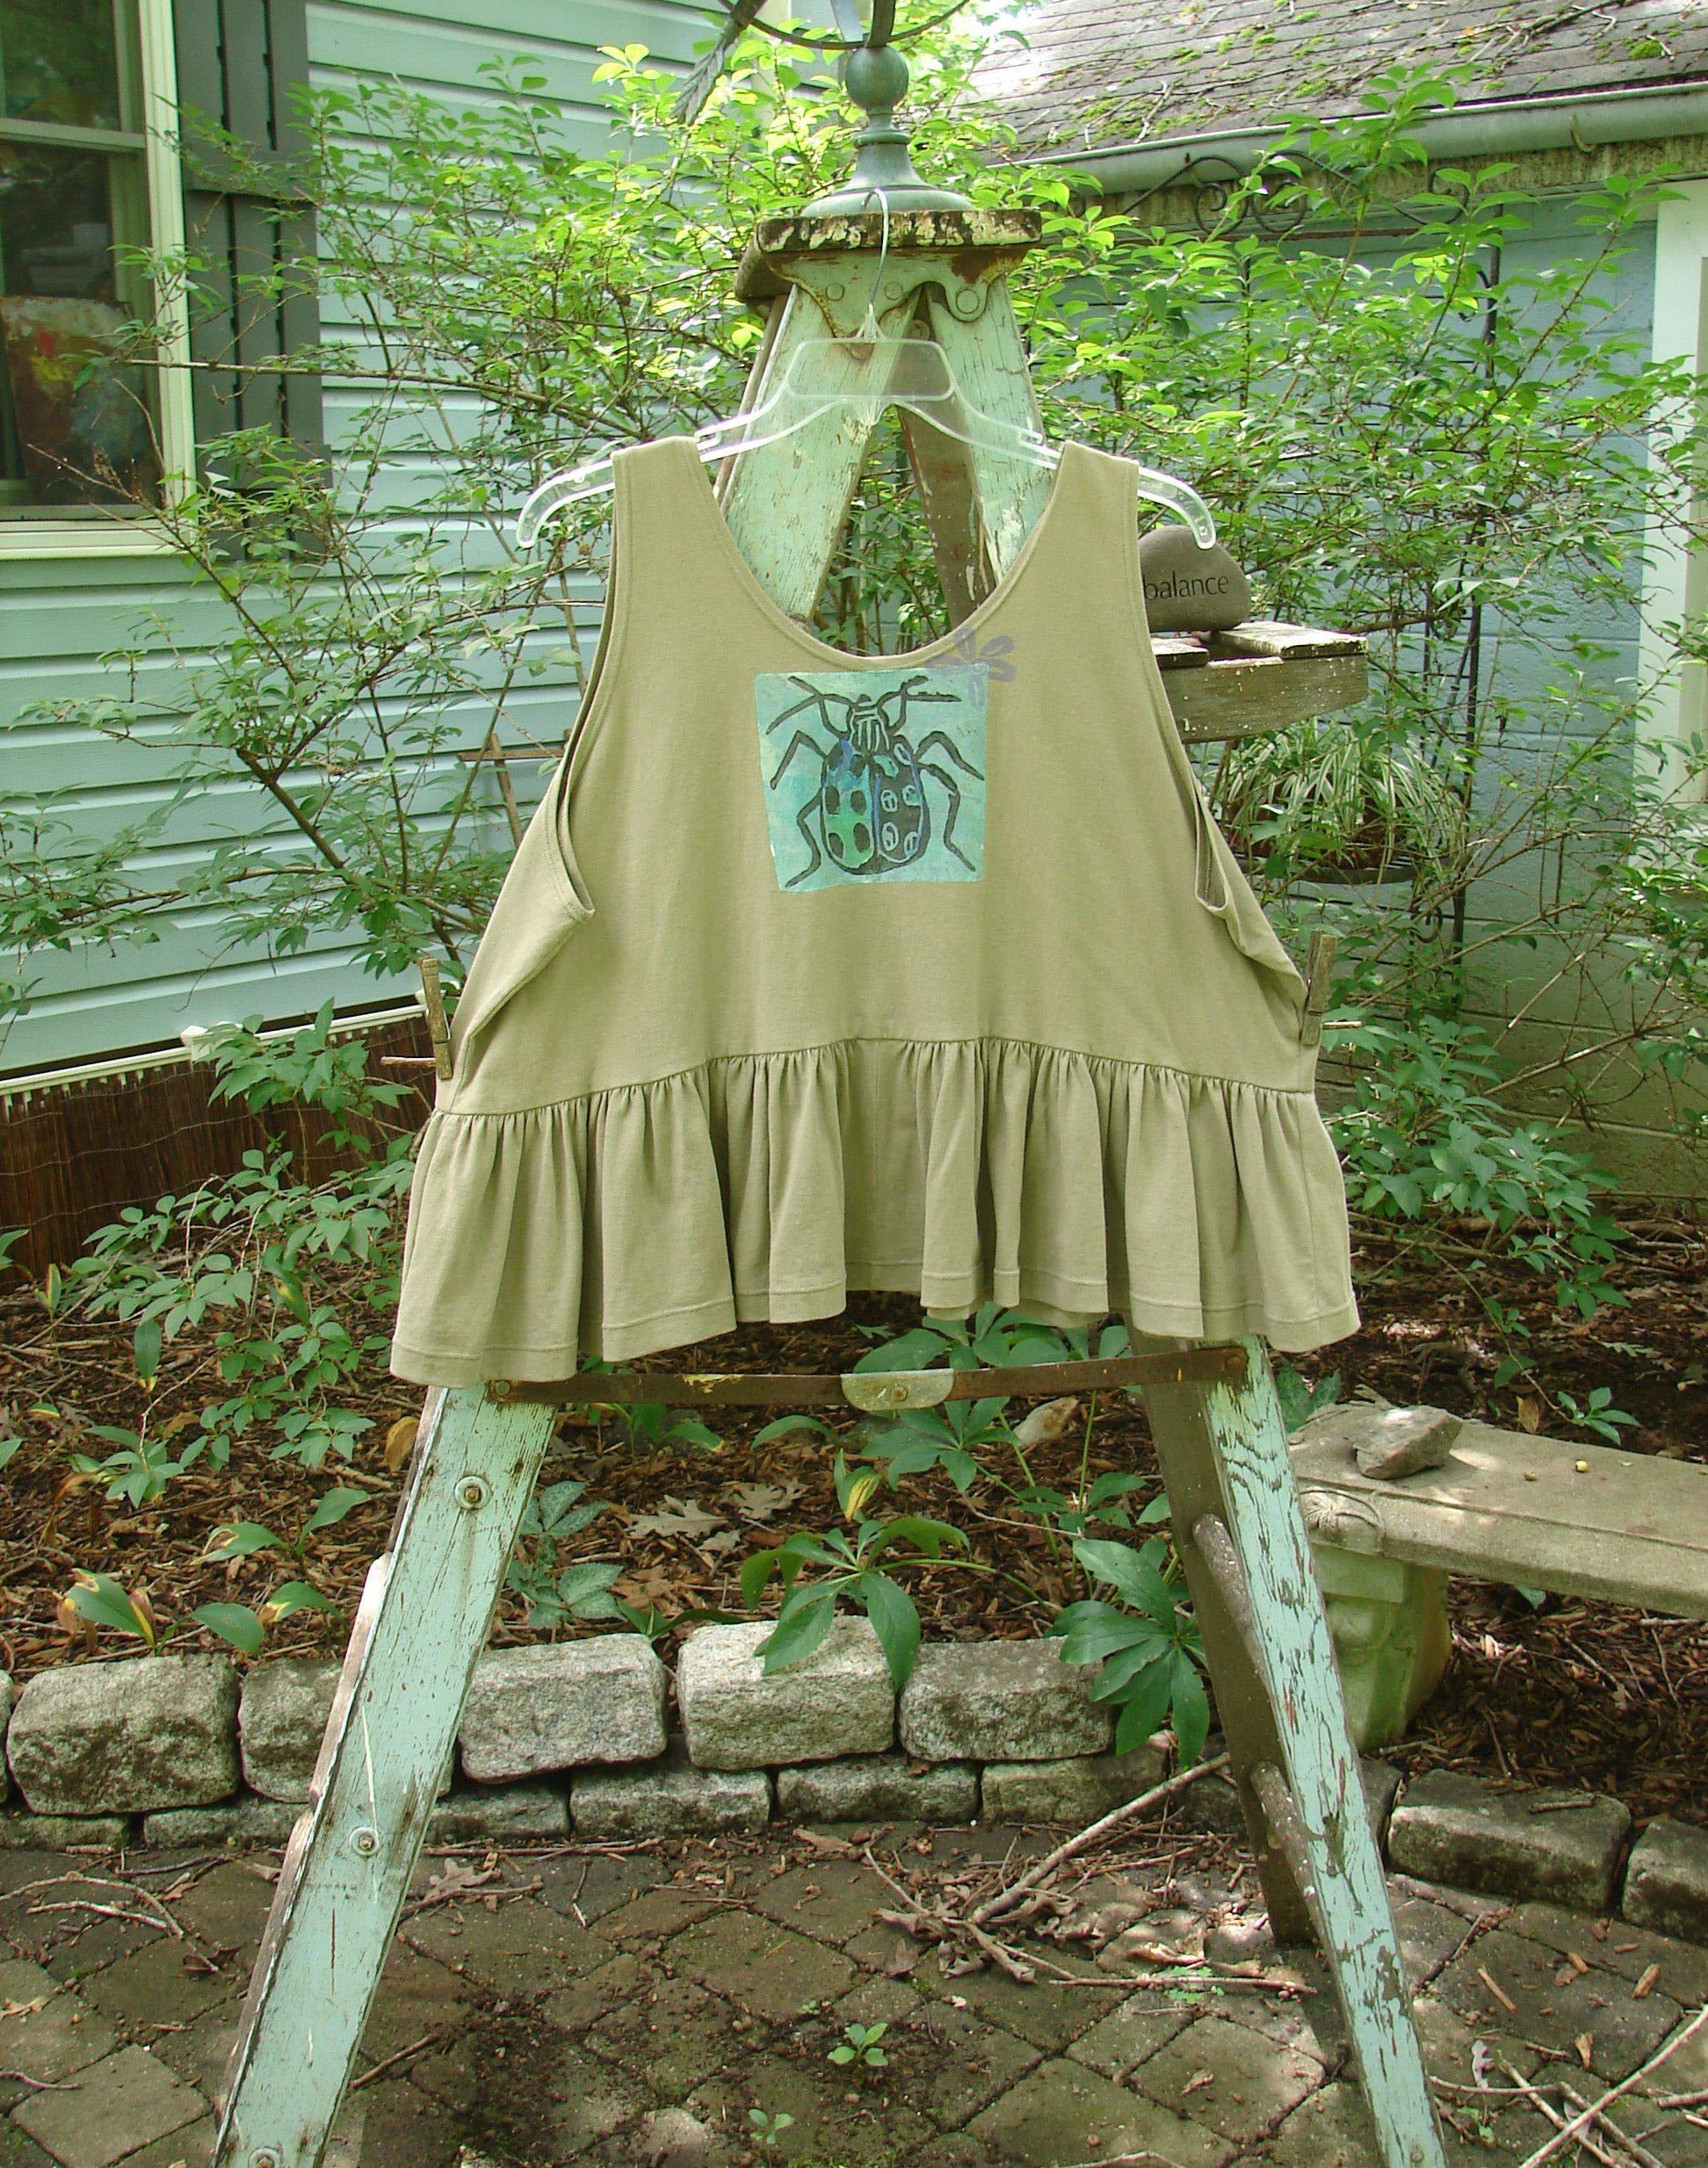 1992 Peplum Top Beetle Wheat OSFA: A vintage flounce top with a wide waist, yoked waist seam, and rounded neckline. Features a beetle-themed patch and a gathered bottom flounce.